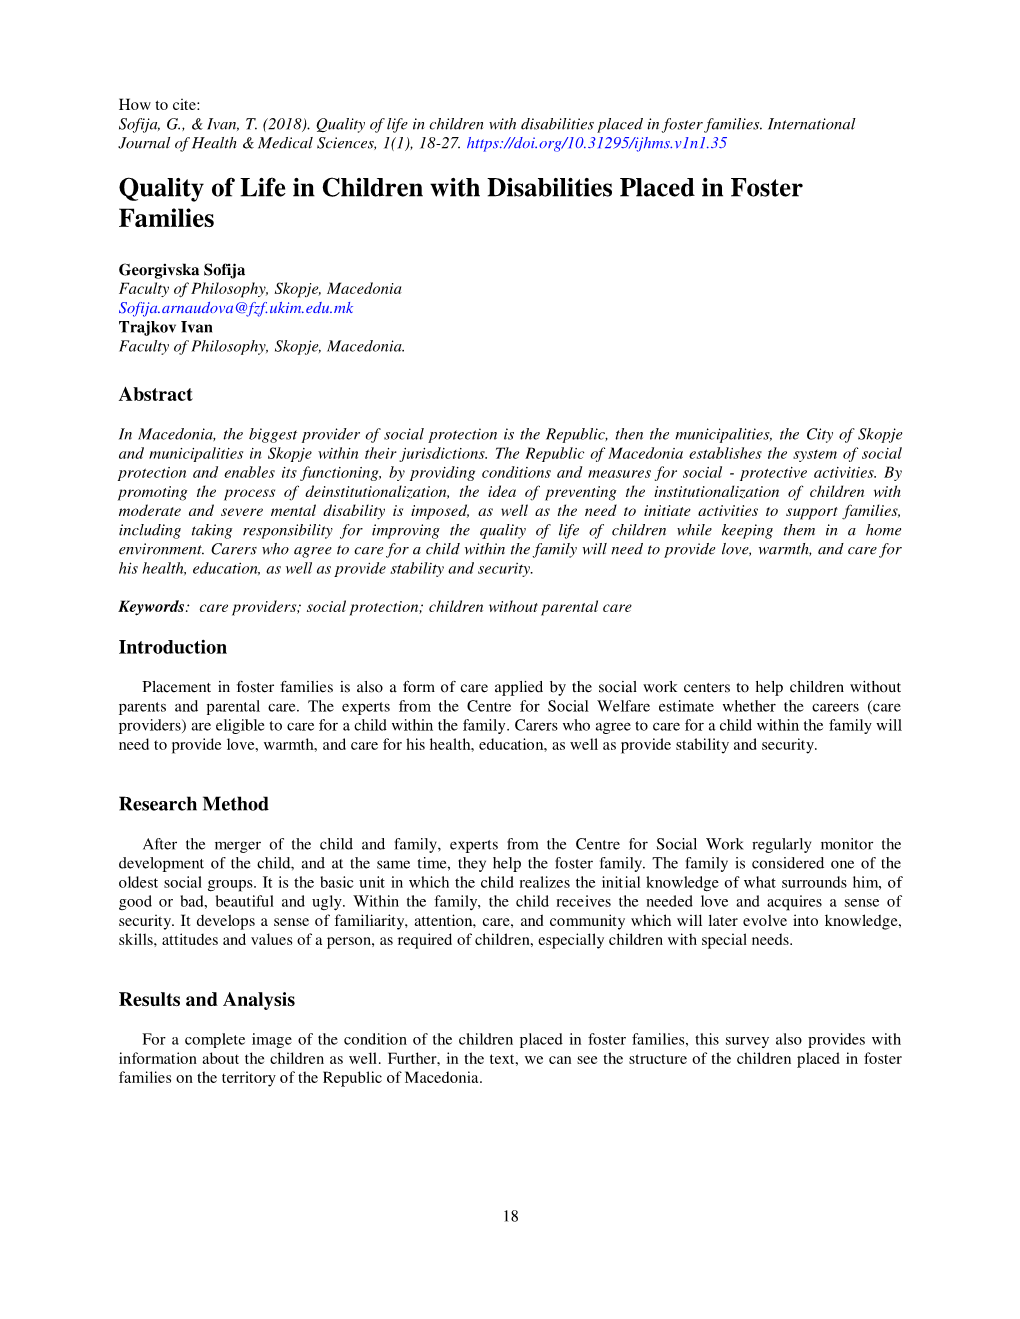 Quality of Life in Children with Disabilities Placed in Foster Families